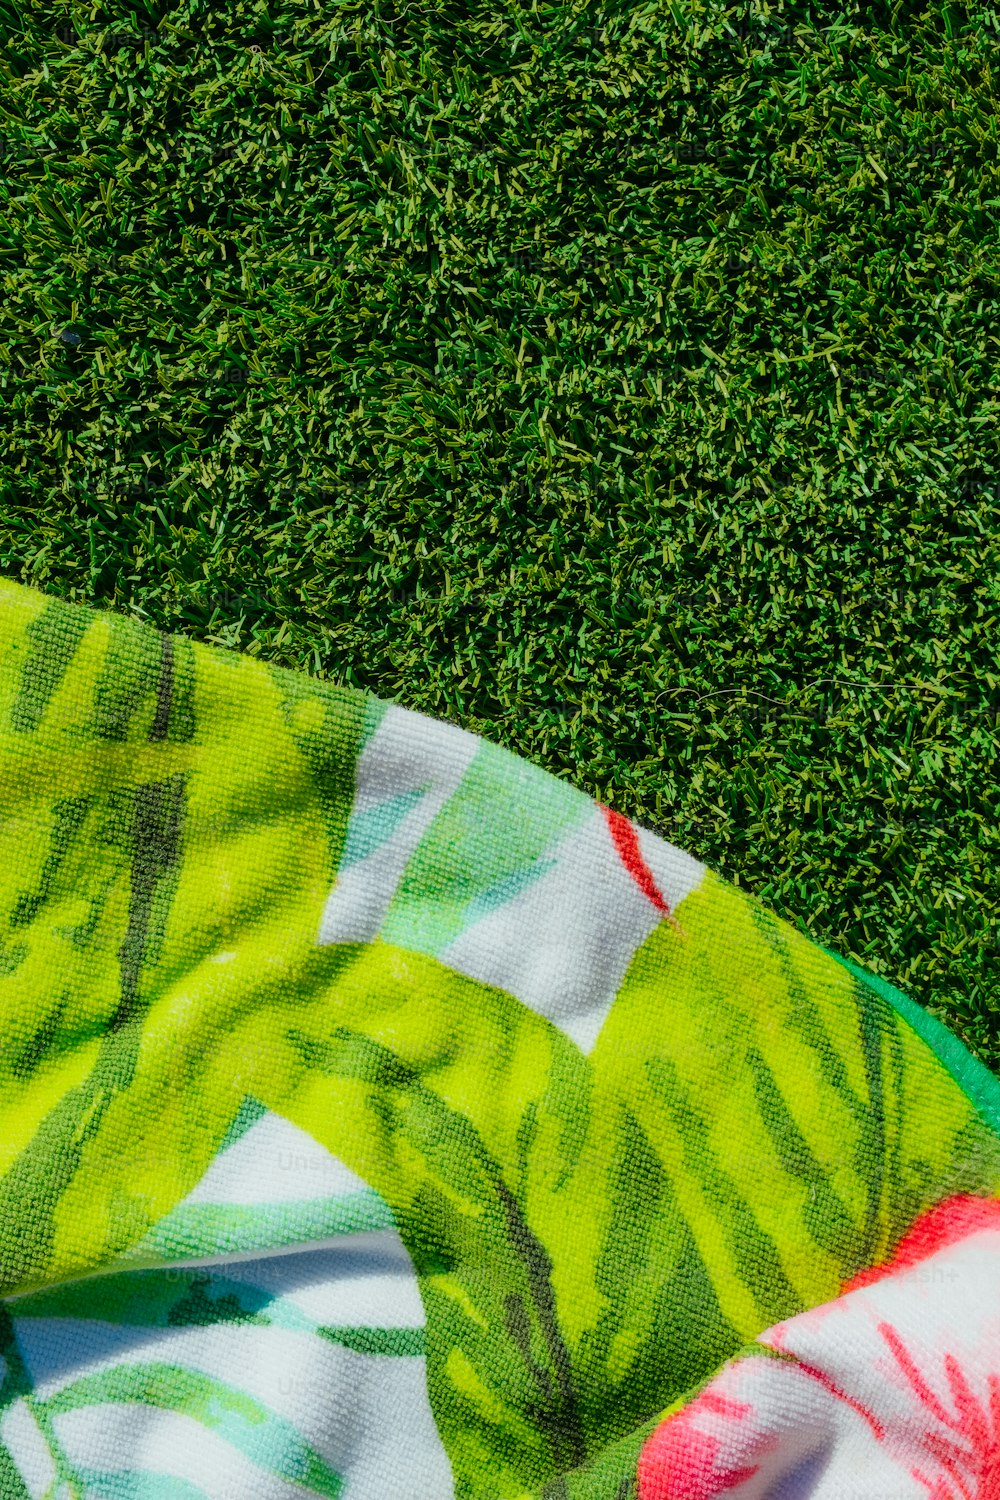 a towel laying on top of a lush green field